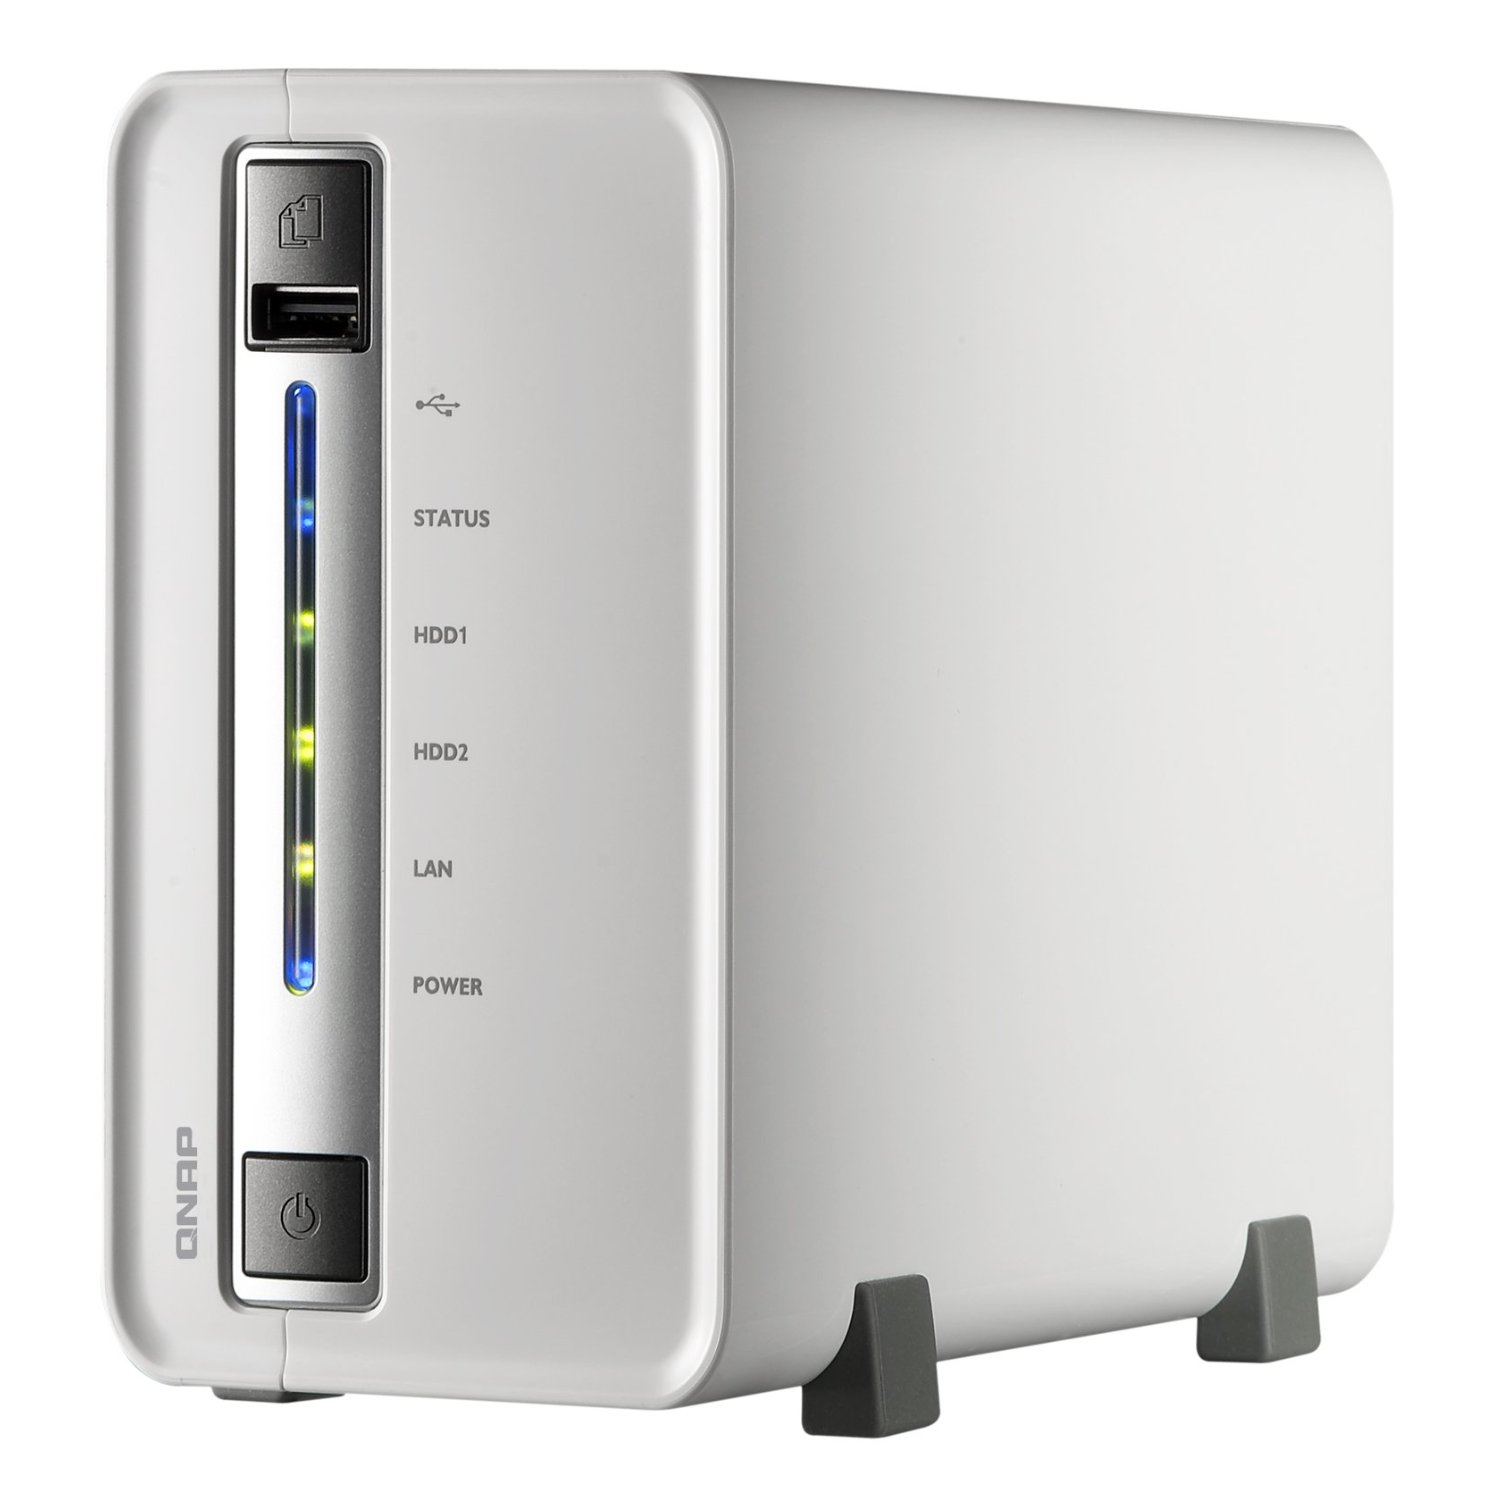 http://thetechjournal.com/wp-content/uploads/images/1110/1319020036-qnap-ts210-2bay-desktop-network-attached-storage-2.jpg